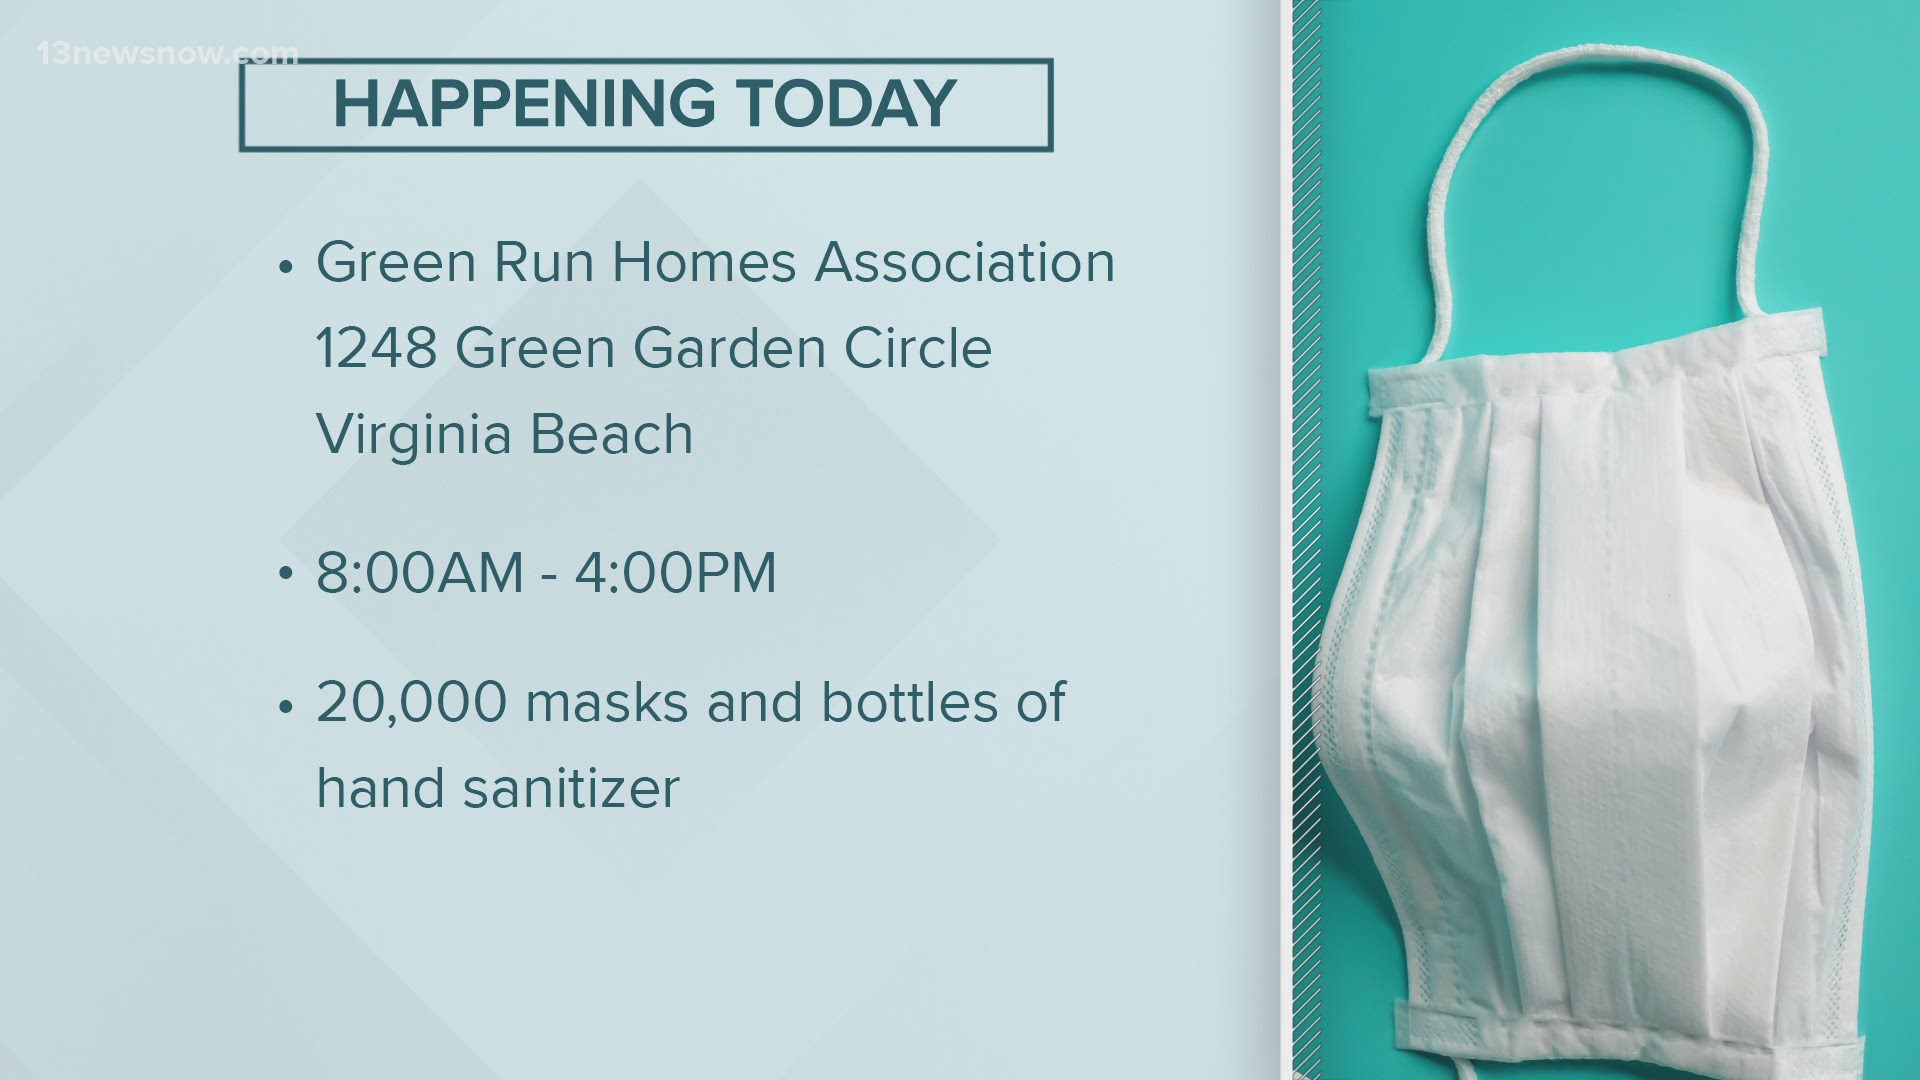 Virginia Beach residents can receive a bag of filled with some masks and hand sanitizer. Additional events will be held in August 2020.